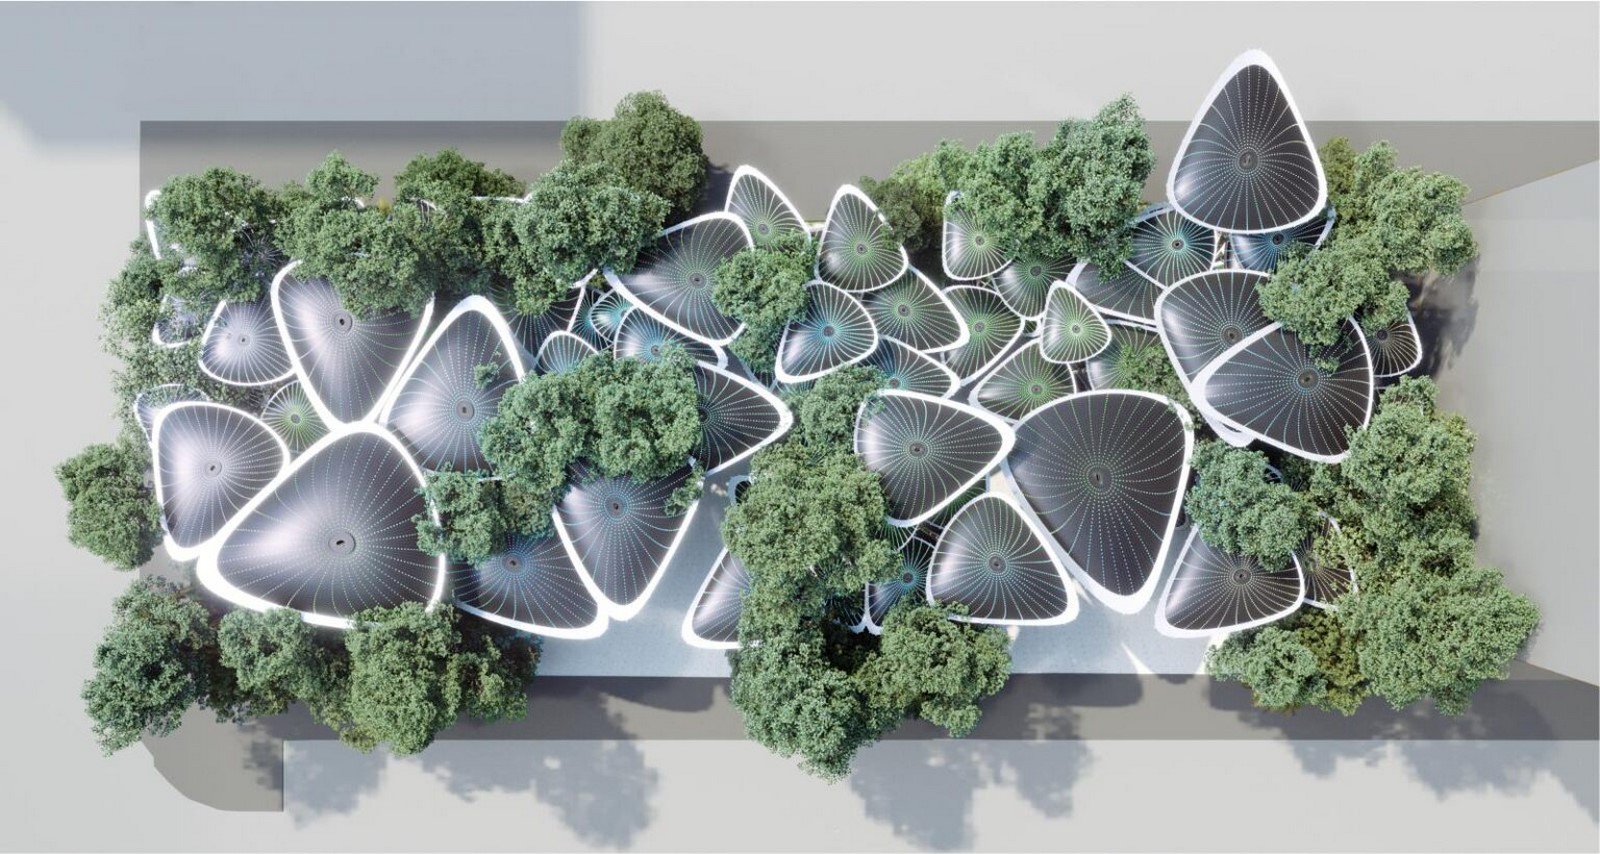 Cooling Stations for Abu Dhabi's Urban Heat Island designed by Mask Architects - Sheet4